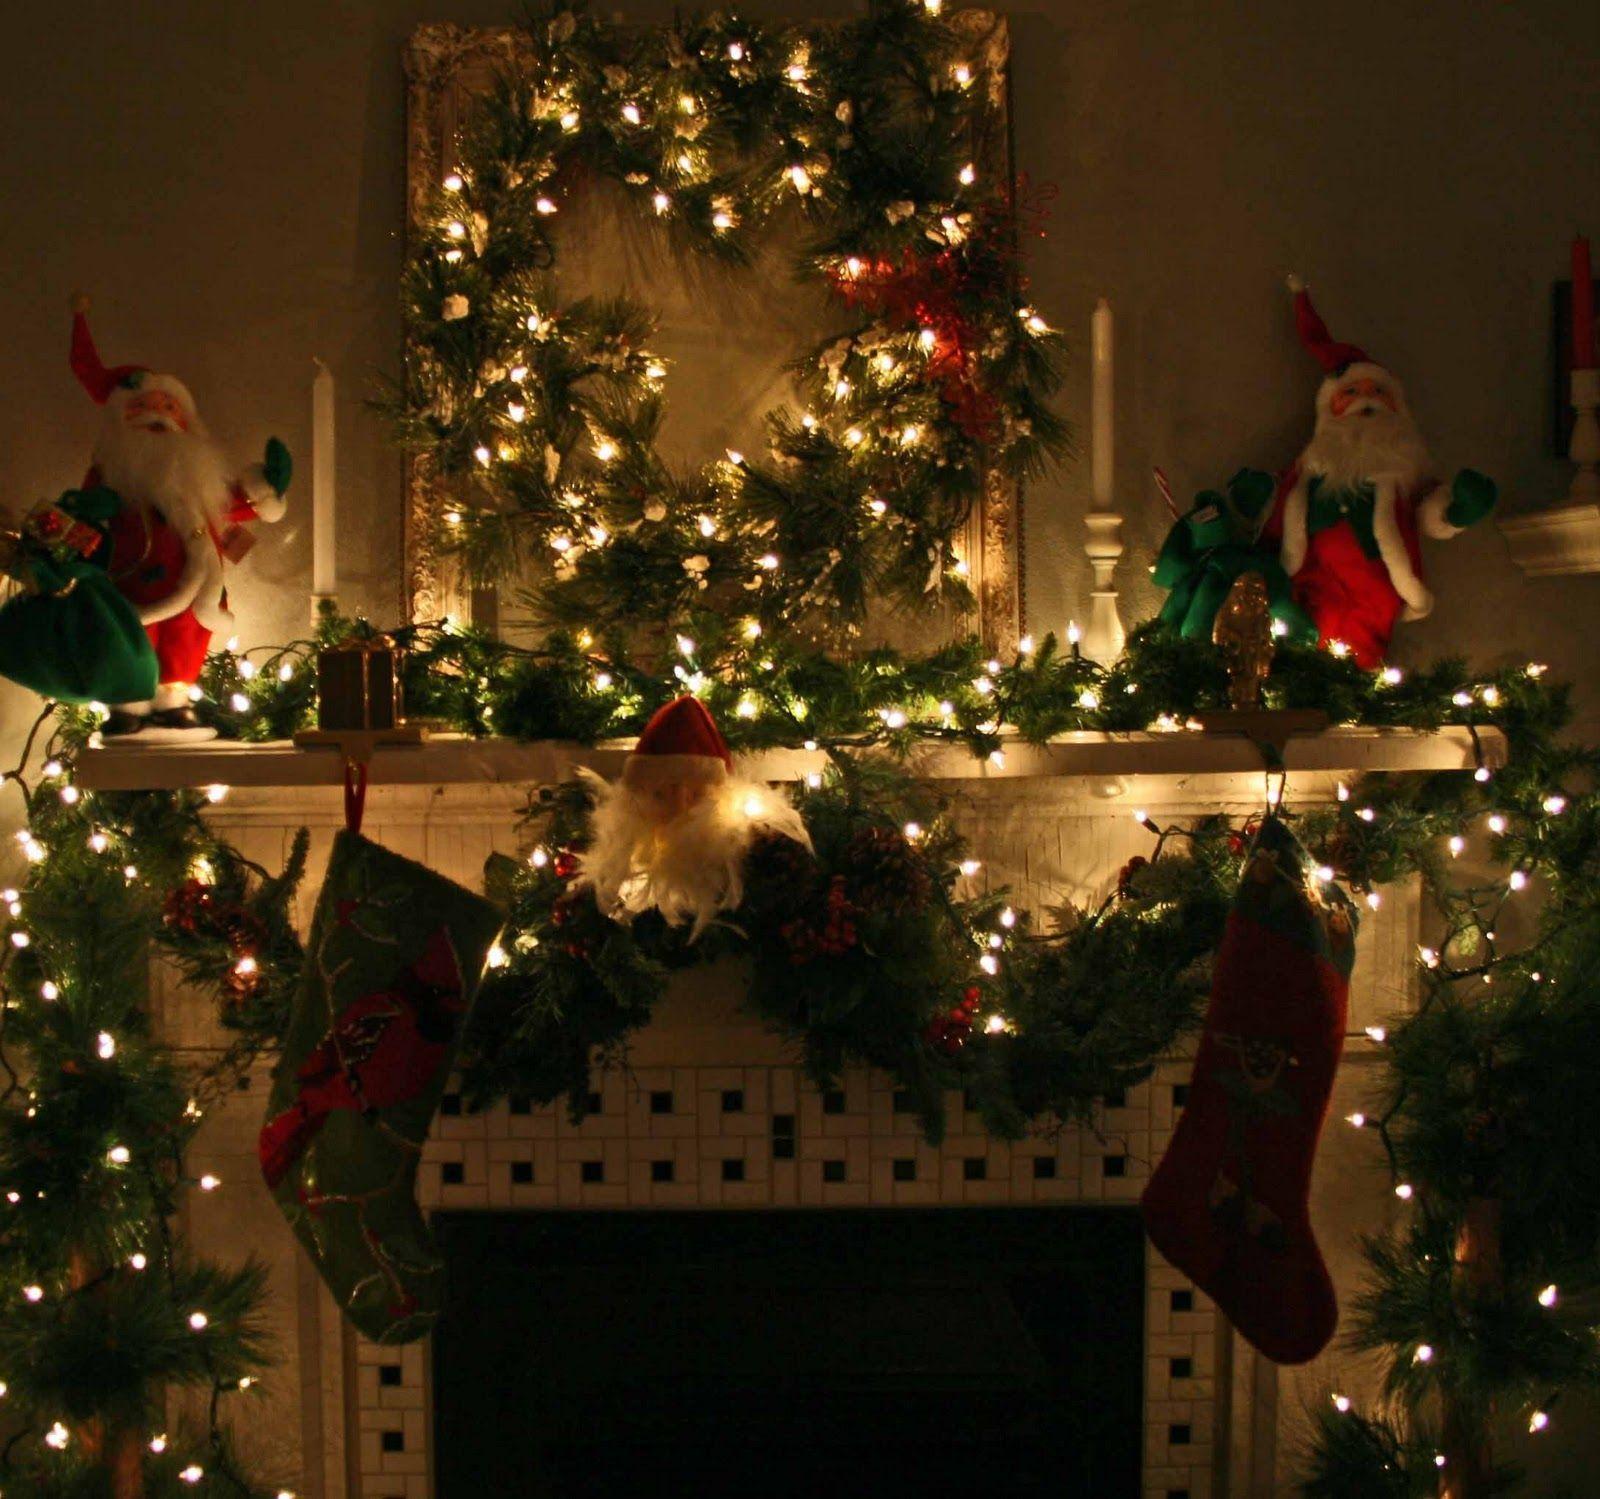 Xmas Stuff For > Christmas Tree And Fireplace Background